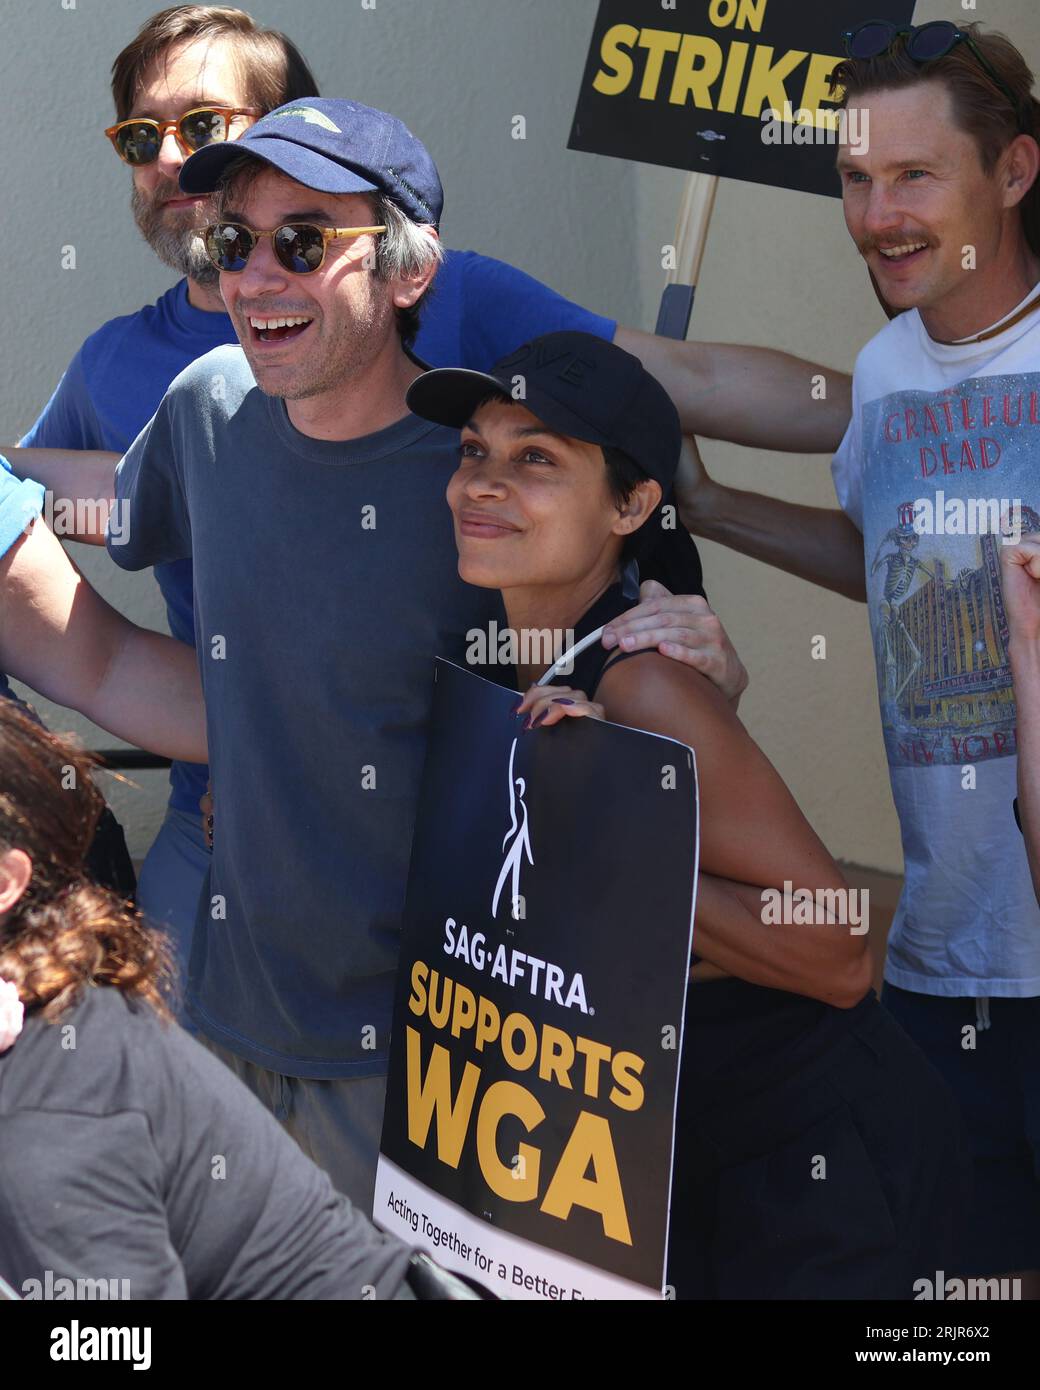 Rosario Dawson is captured walking in solidarity with members of two unions, SAG-AFTRA and WGA, during a protest outside Paramount studios Stock Photo